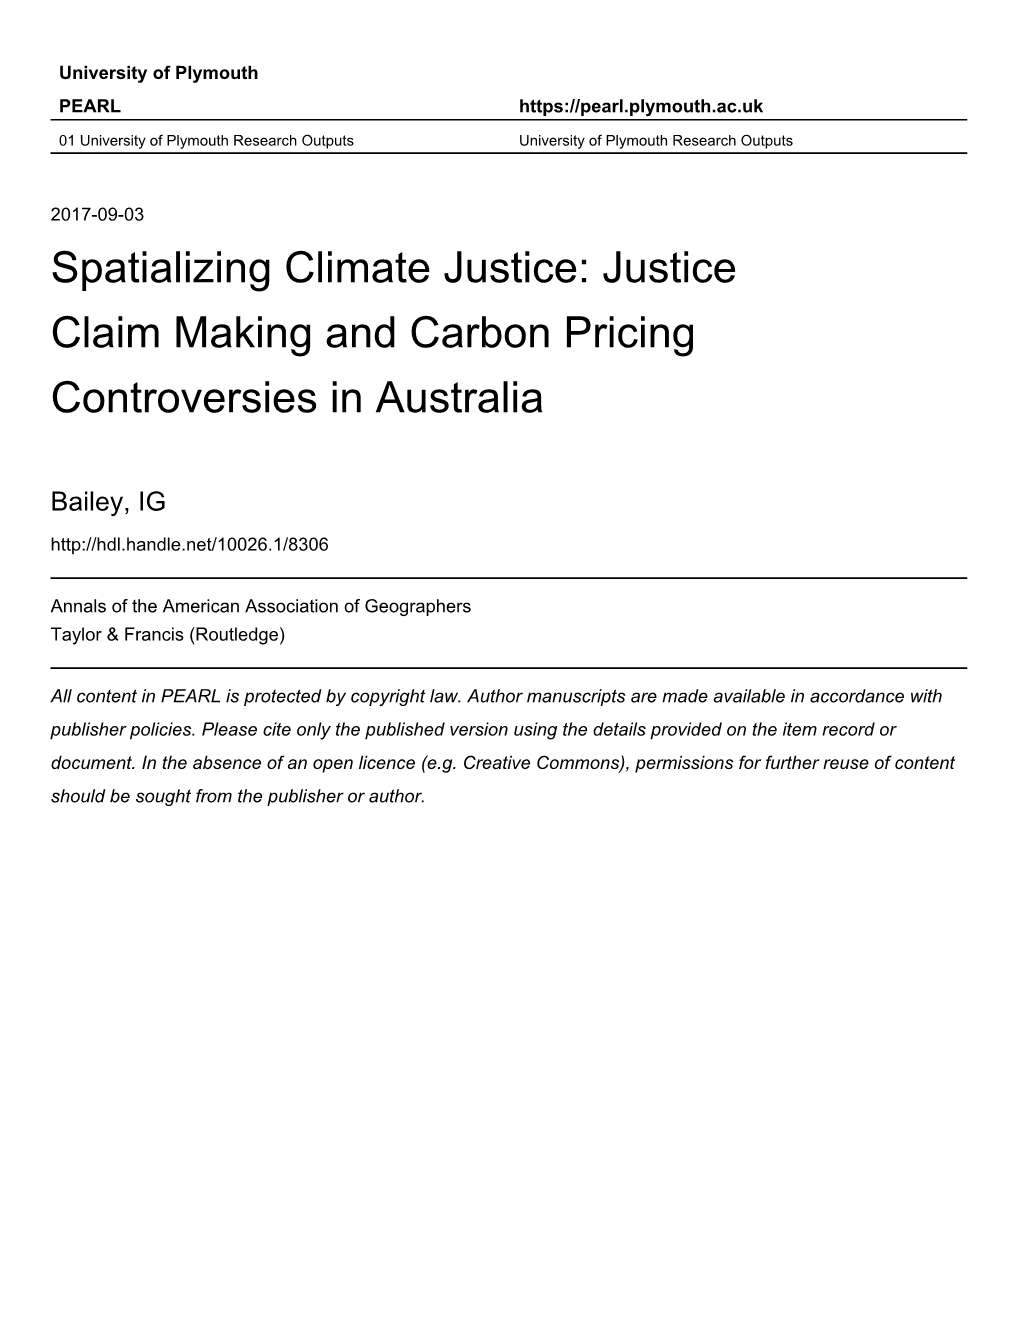 Spatializing Climate Justice: Justice Claim-Making and Carbon-Pricing Controversies in Australia Ian Bailey School of Geography